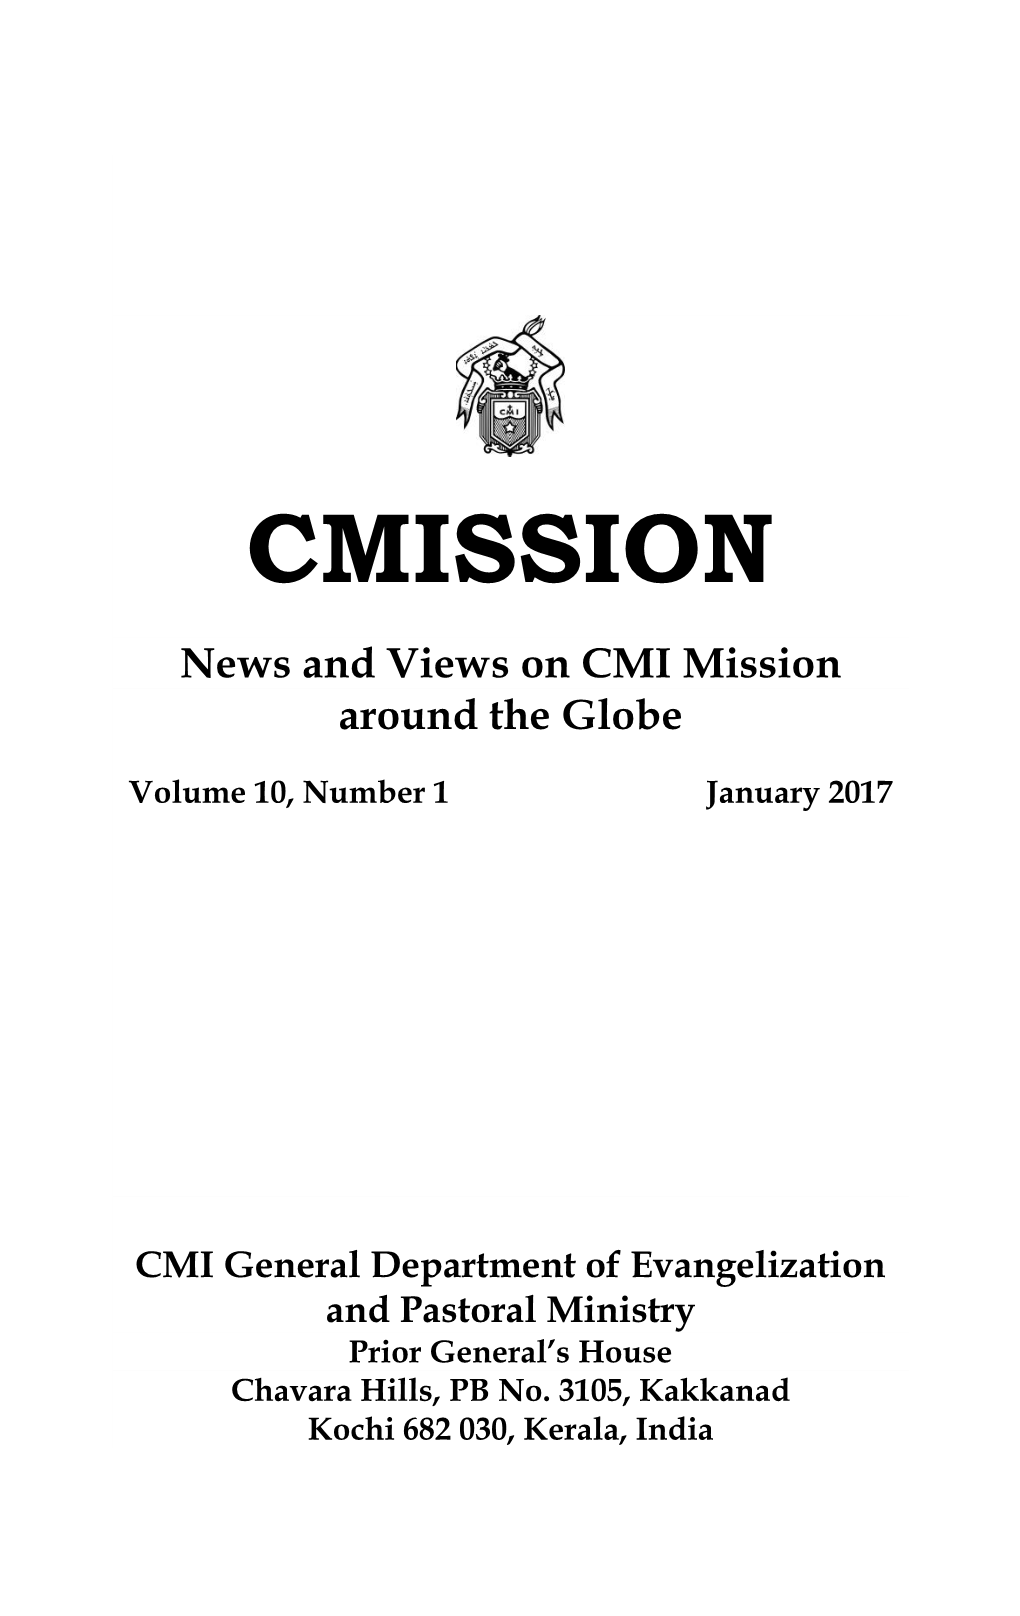 CMISSION News and Views on CMI Mission Around the Globe